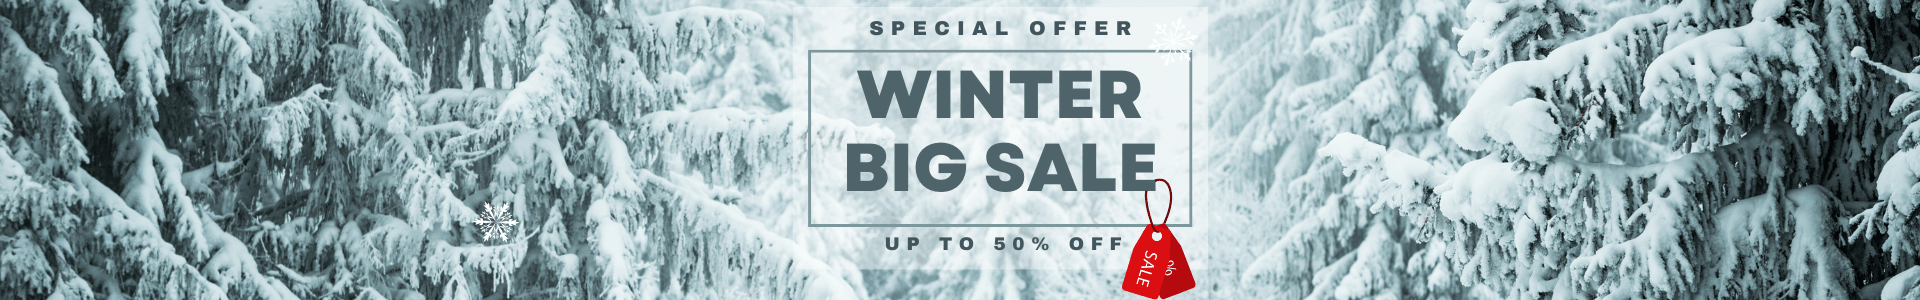 Great Winter Sale, Save up to 50%!